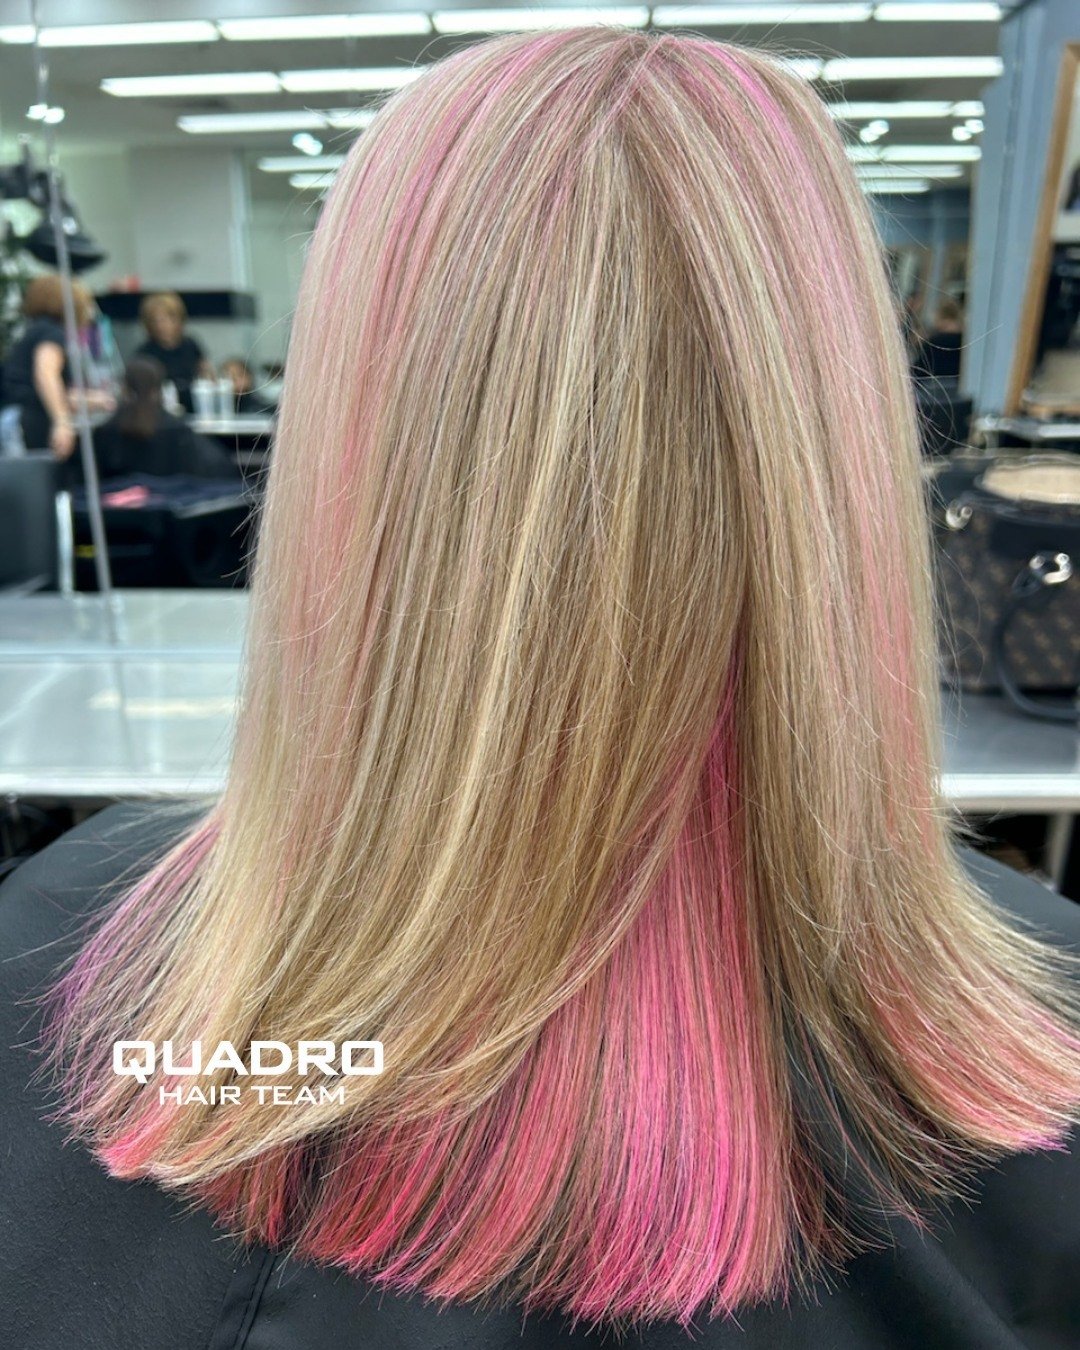 Pop of Pink 🌸 What colour would you get?⁠
⁠
Speak to our stylists today!⁠
📍 Brandon Park, Wheelers Hill⁠
⁠
#quadrohairteam #wheelershillsalon #hairdresser #hair #blonde ⁠
#hairstyle #hairinspo #beauty #hairgrowth #hairgoals #mua